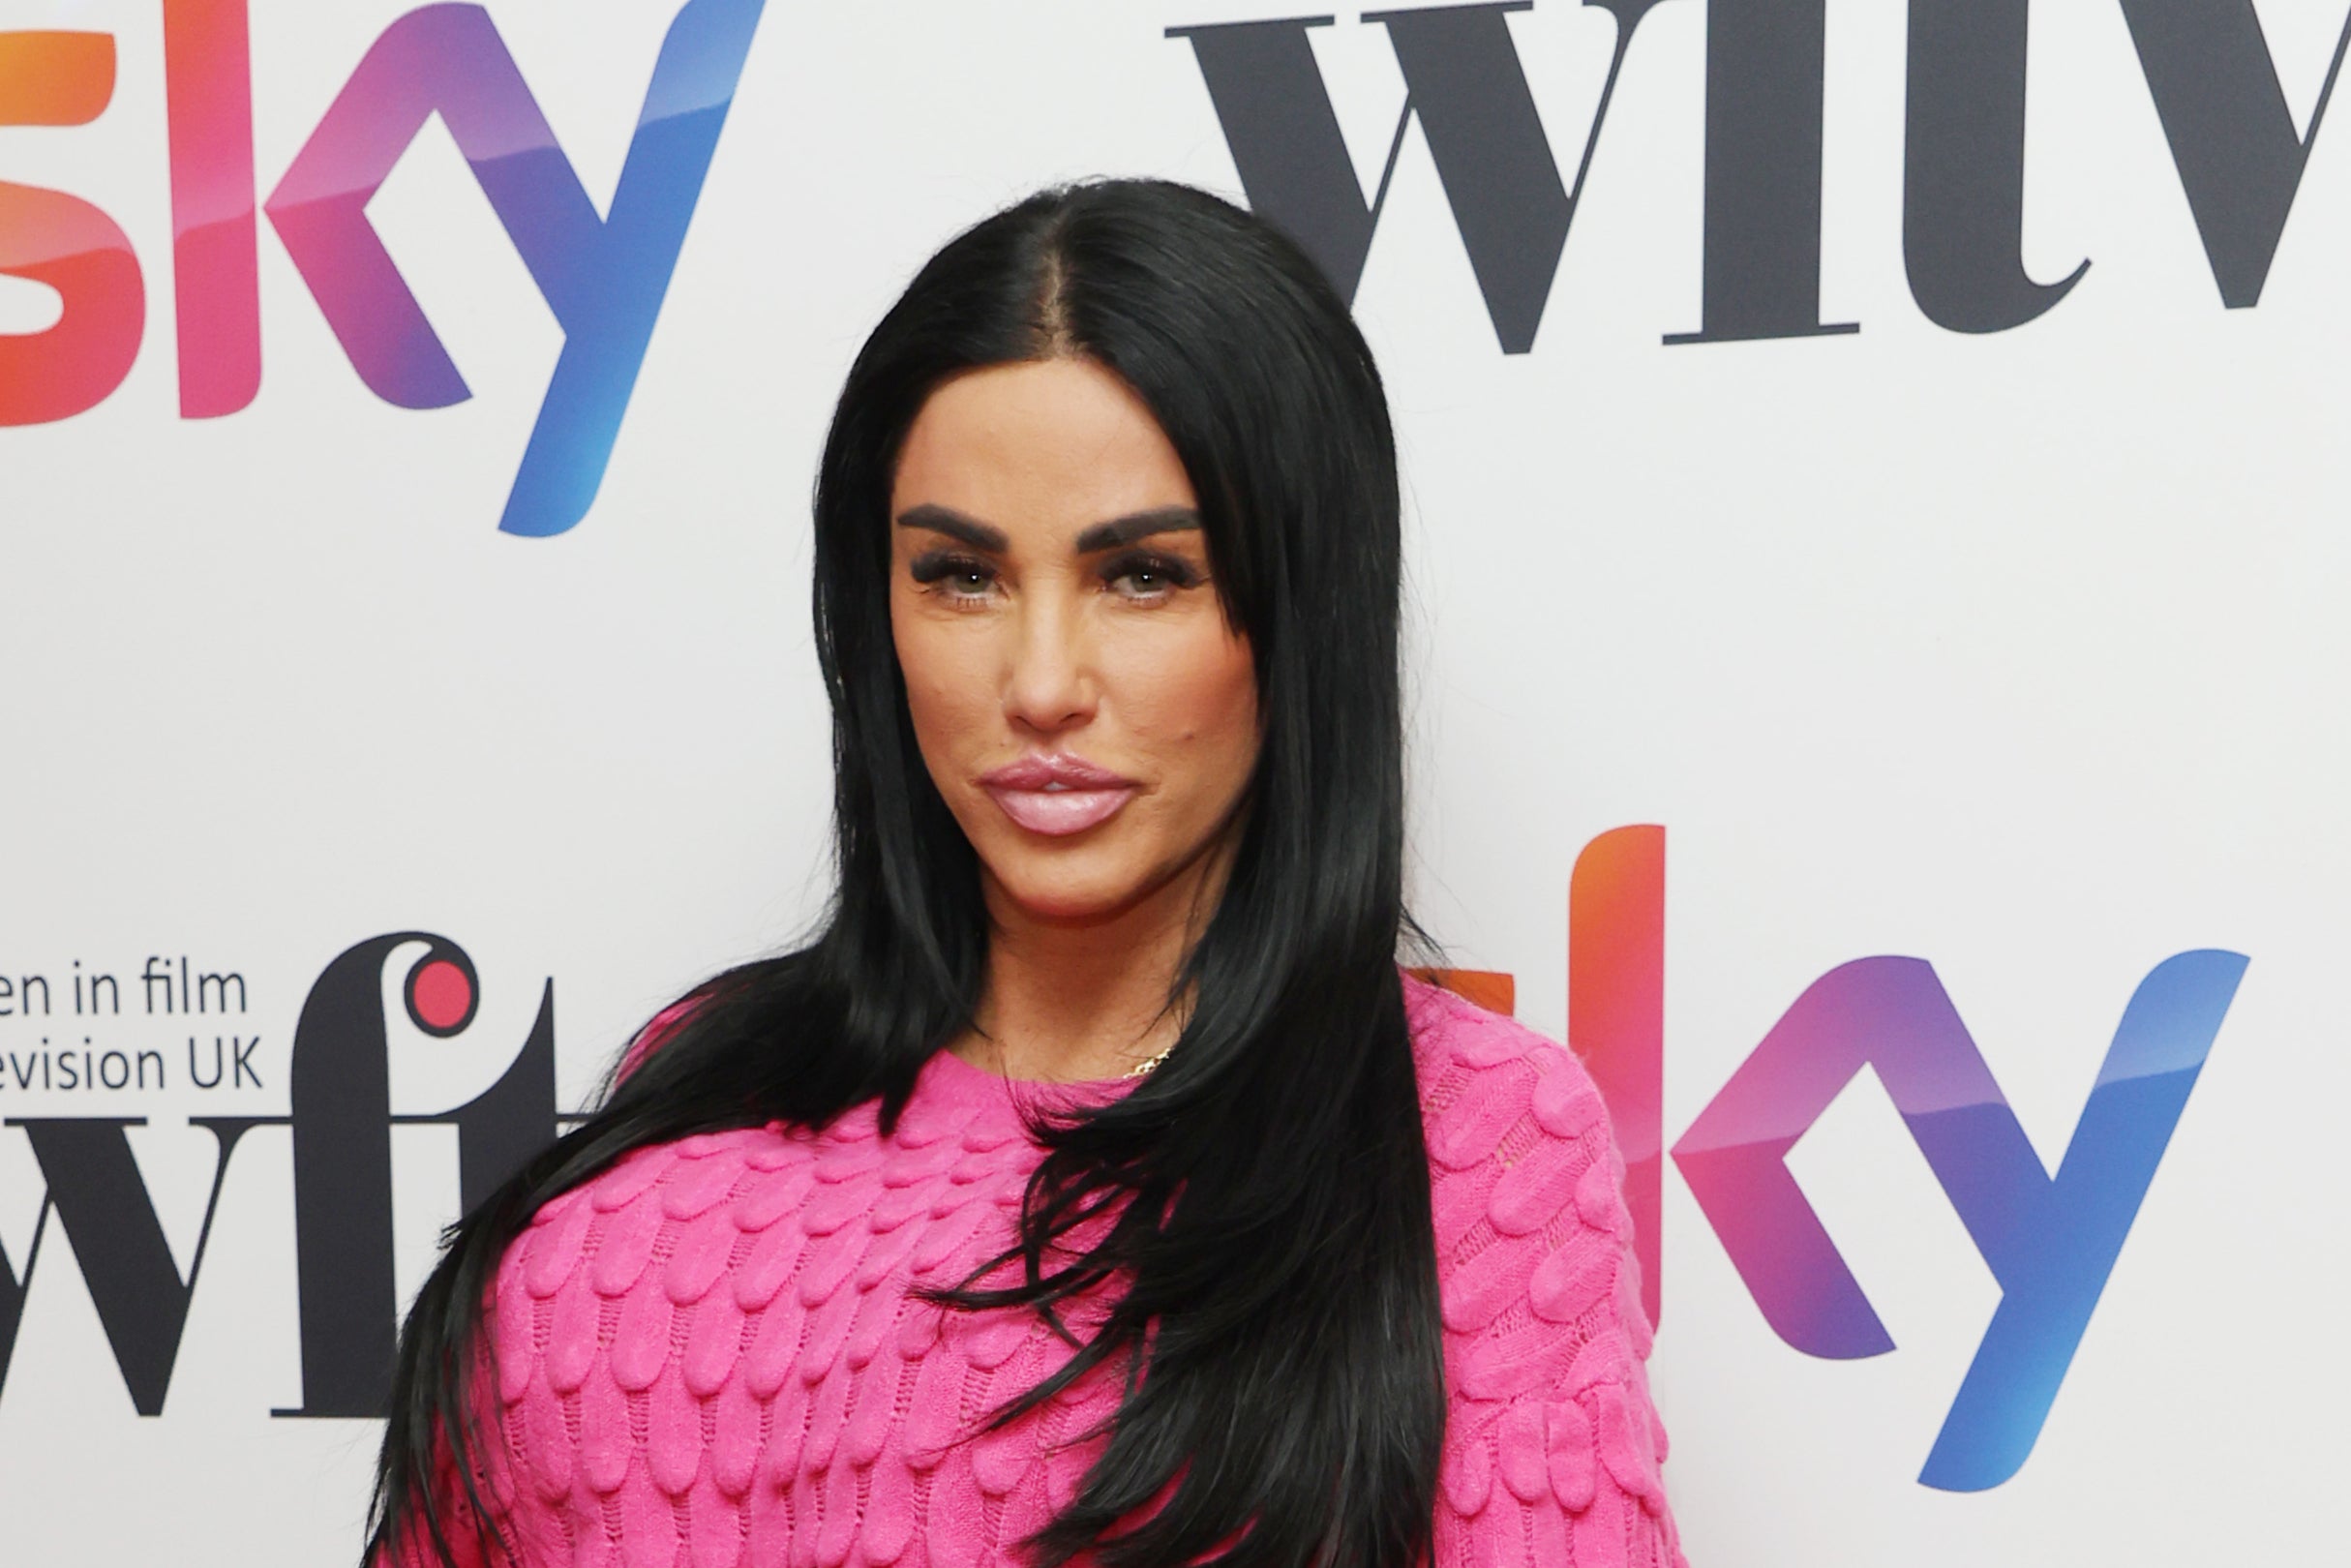 Katie Price wants to transform her traumatic experiences into a way to help others